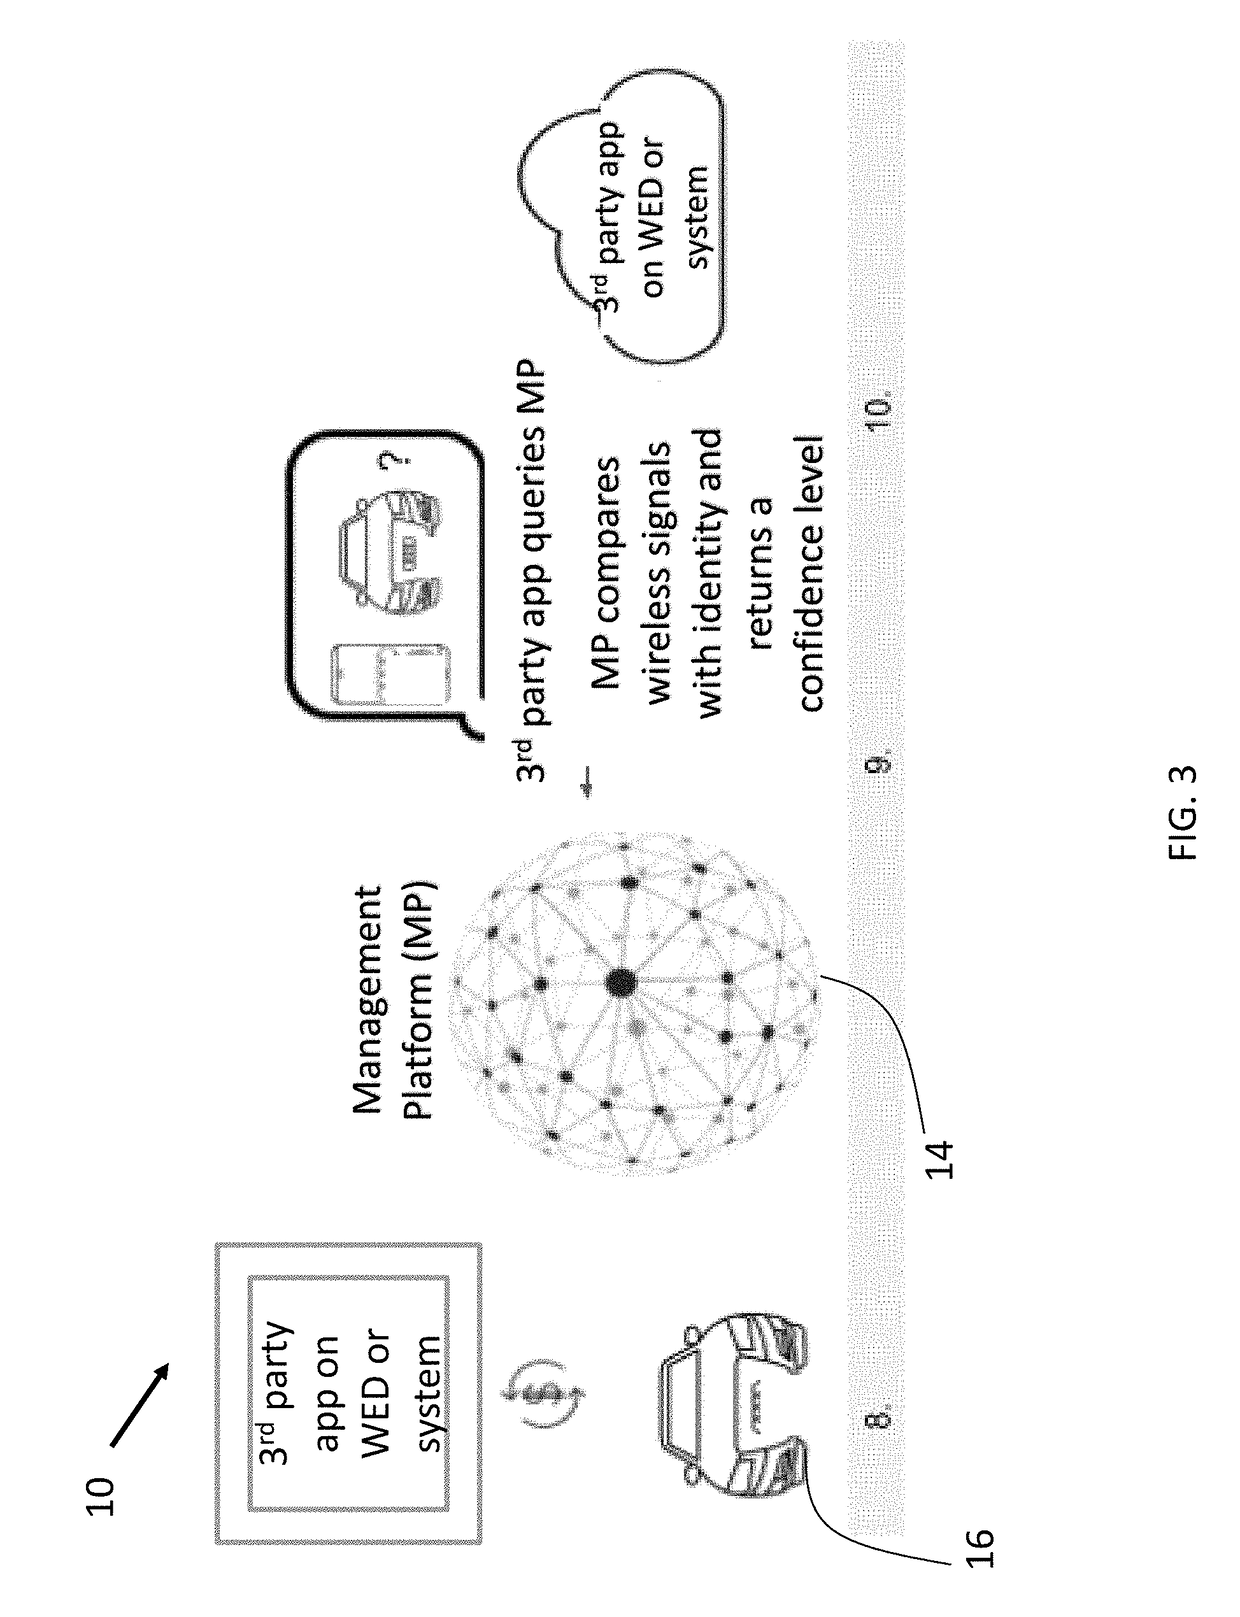 Systems, Devices, Software, and Methods for Managing Access using Wireless Signals